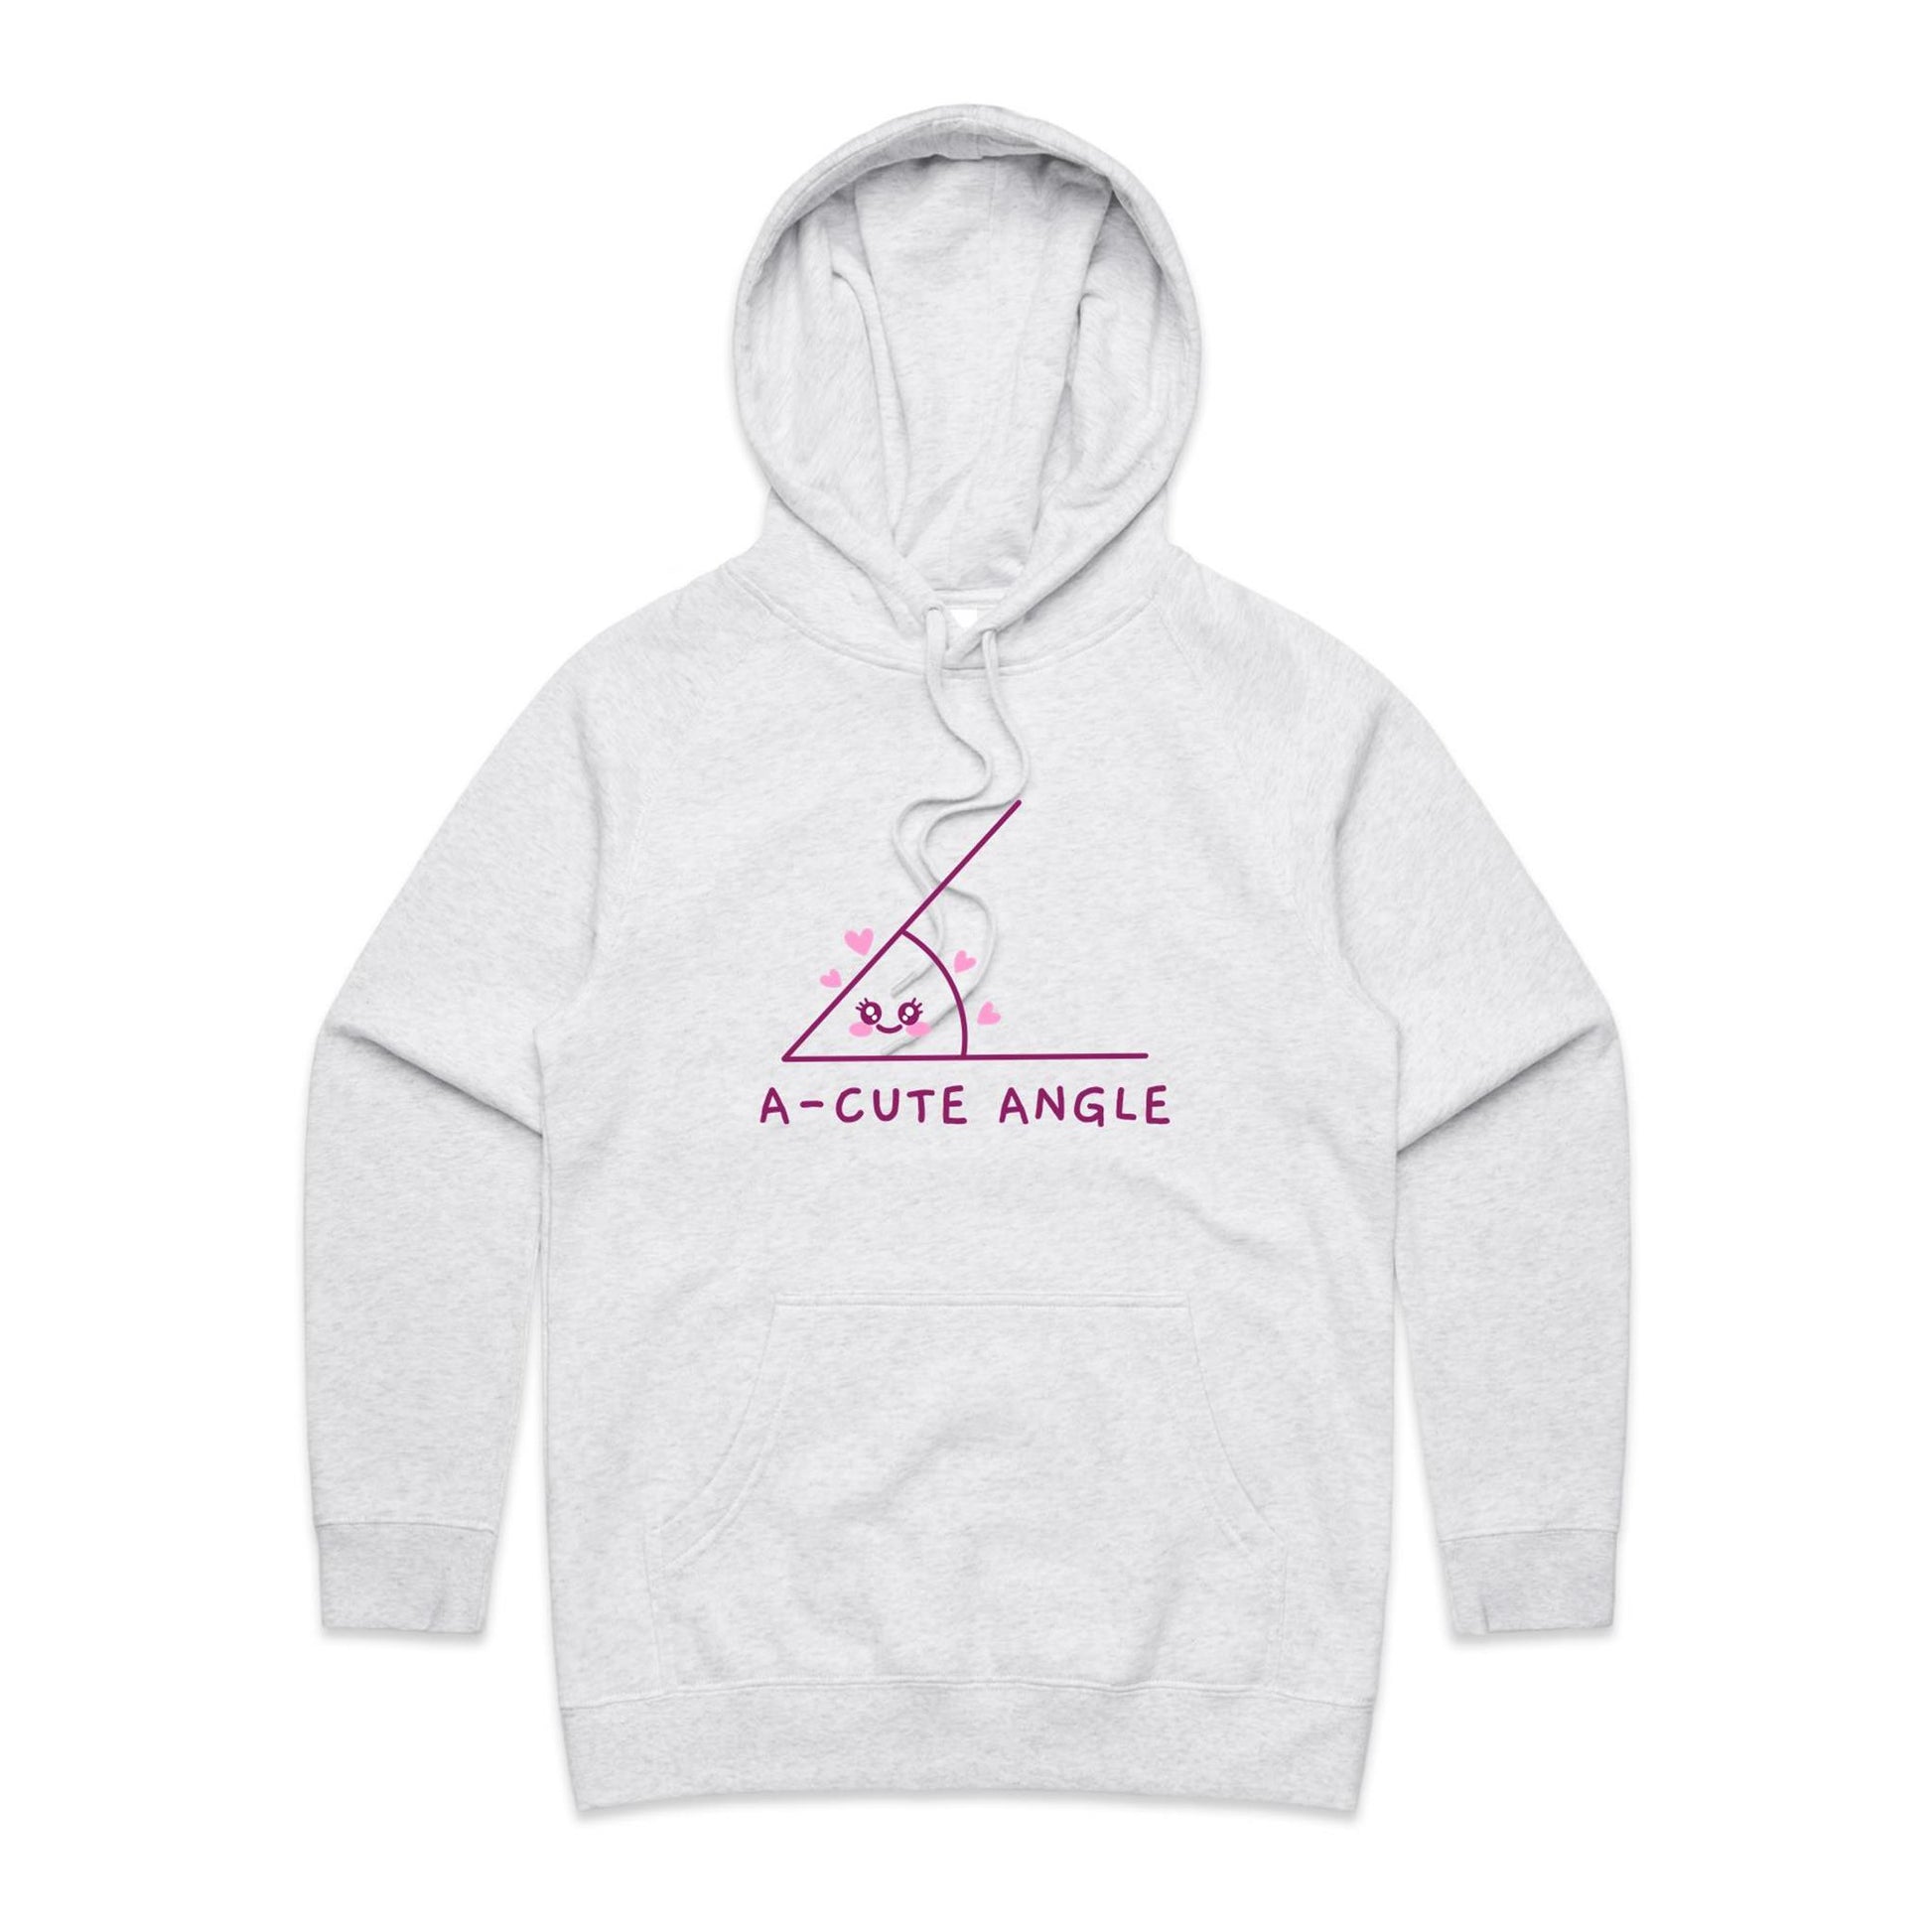 A-Cute Angle - Women's Supply Hood White Marle Womens Supply Hoodie Maths Science